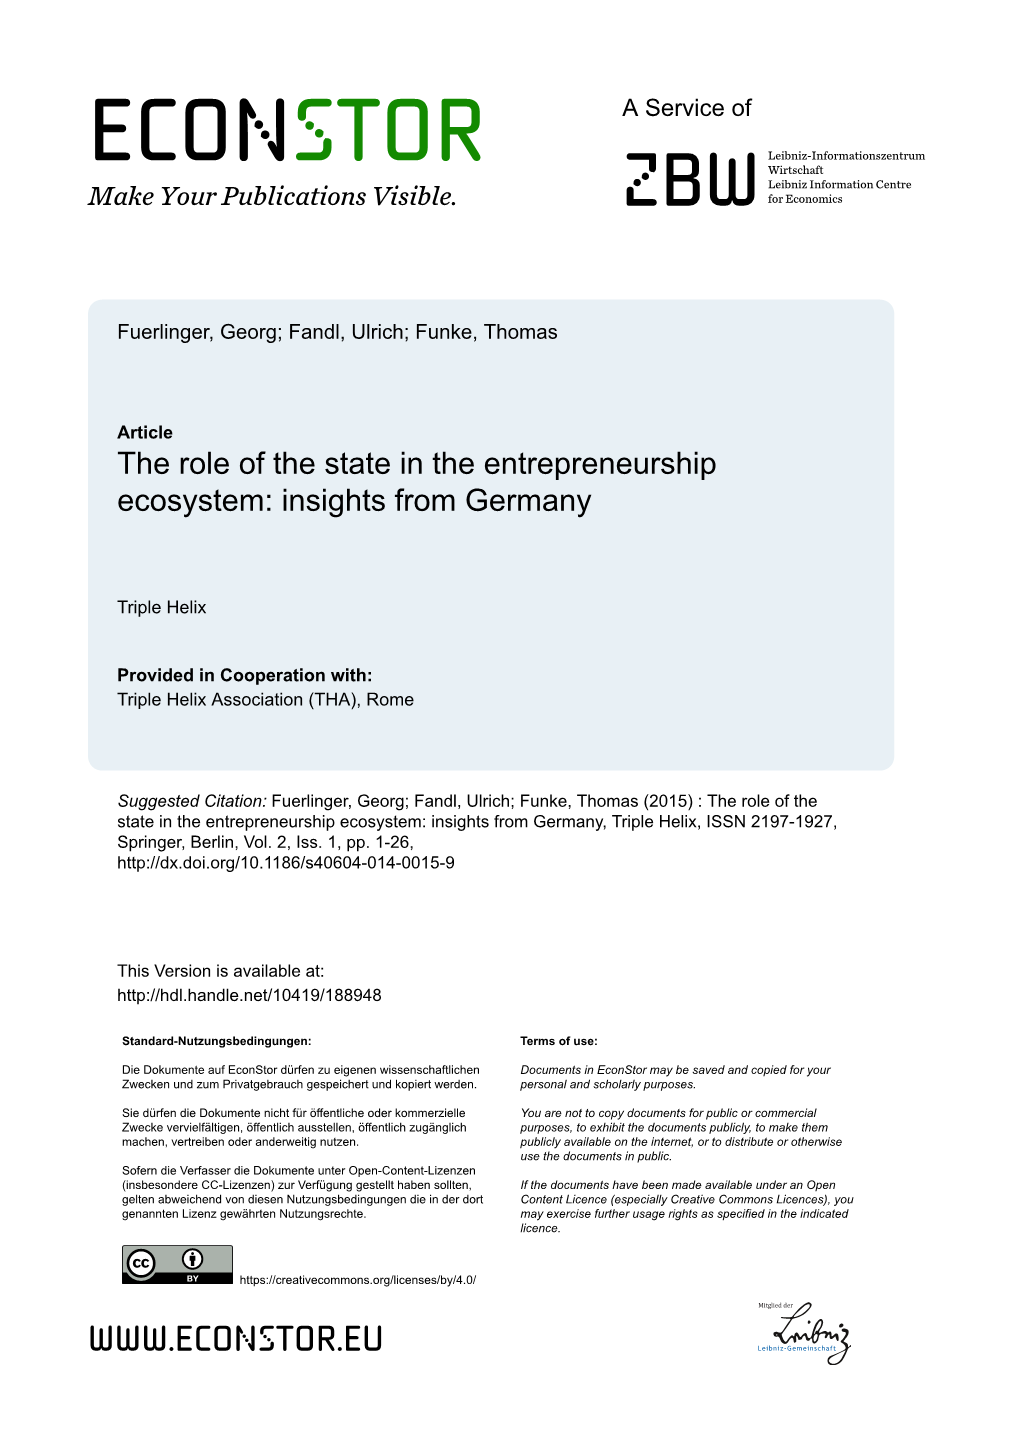 The Role of the State in the Entrepreneurship Ecosystem: Insights from Germany